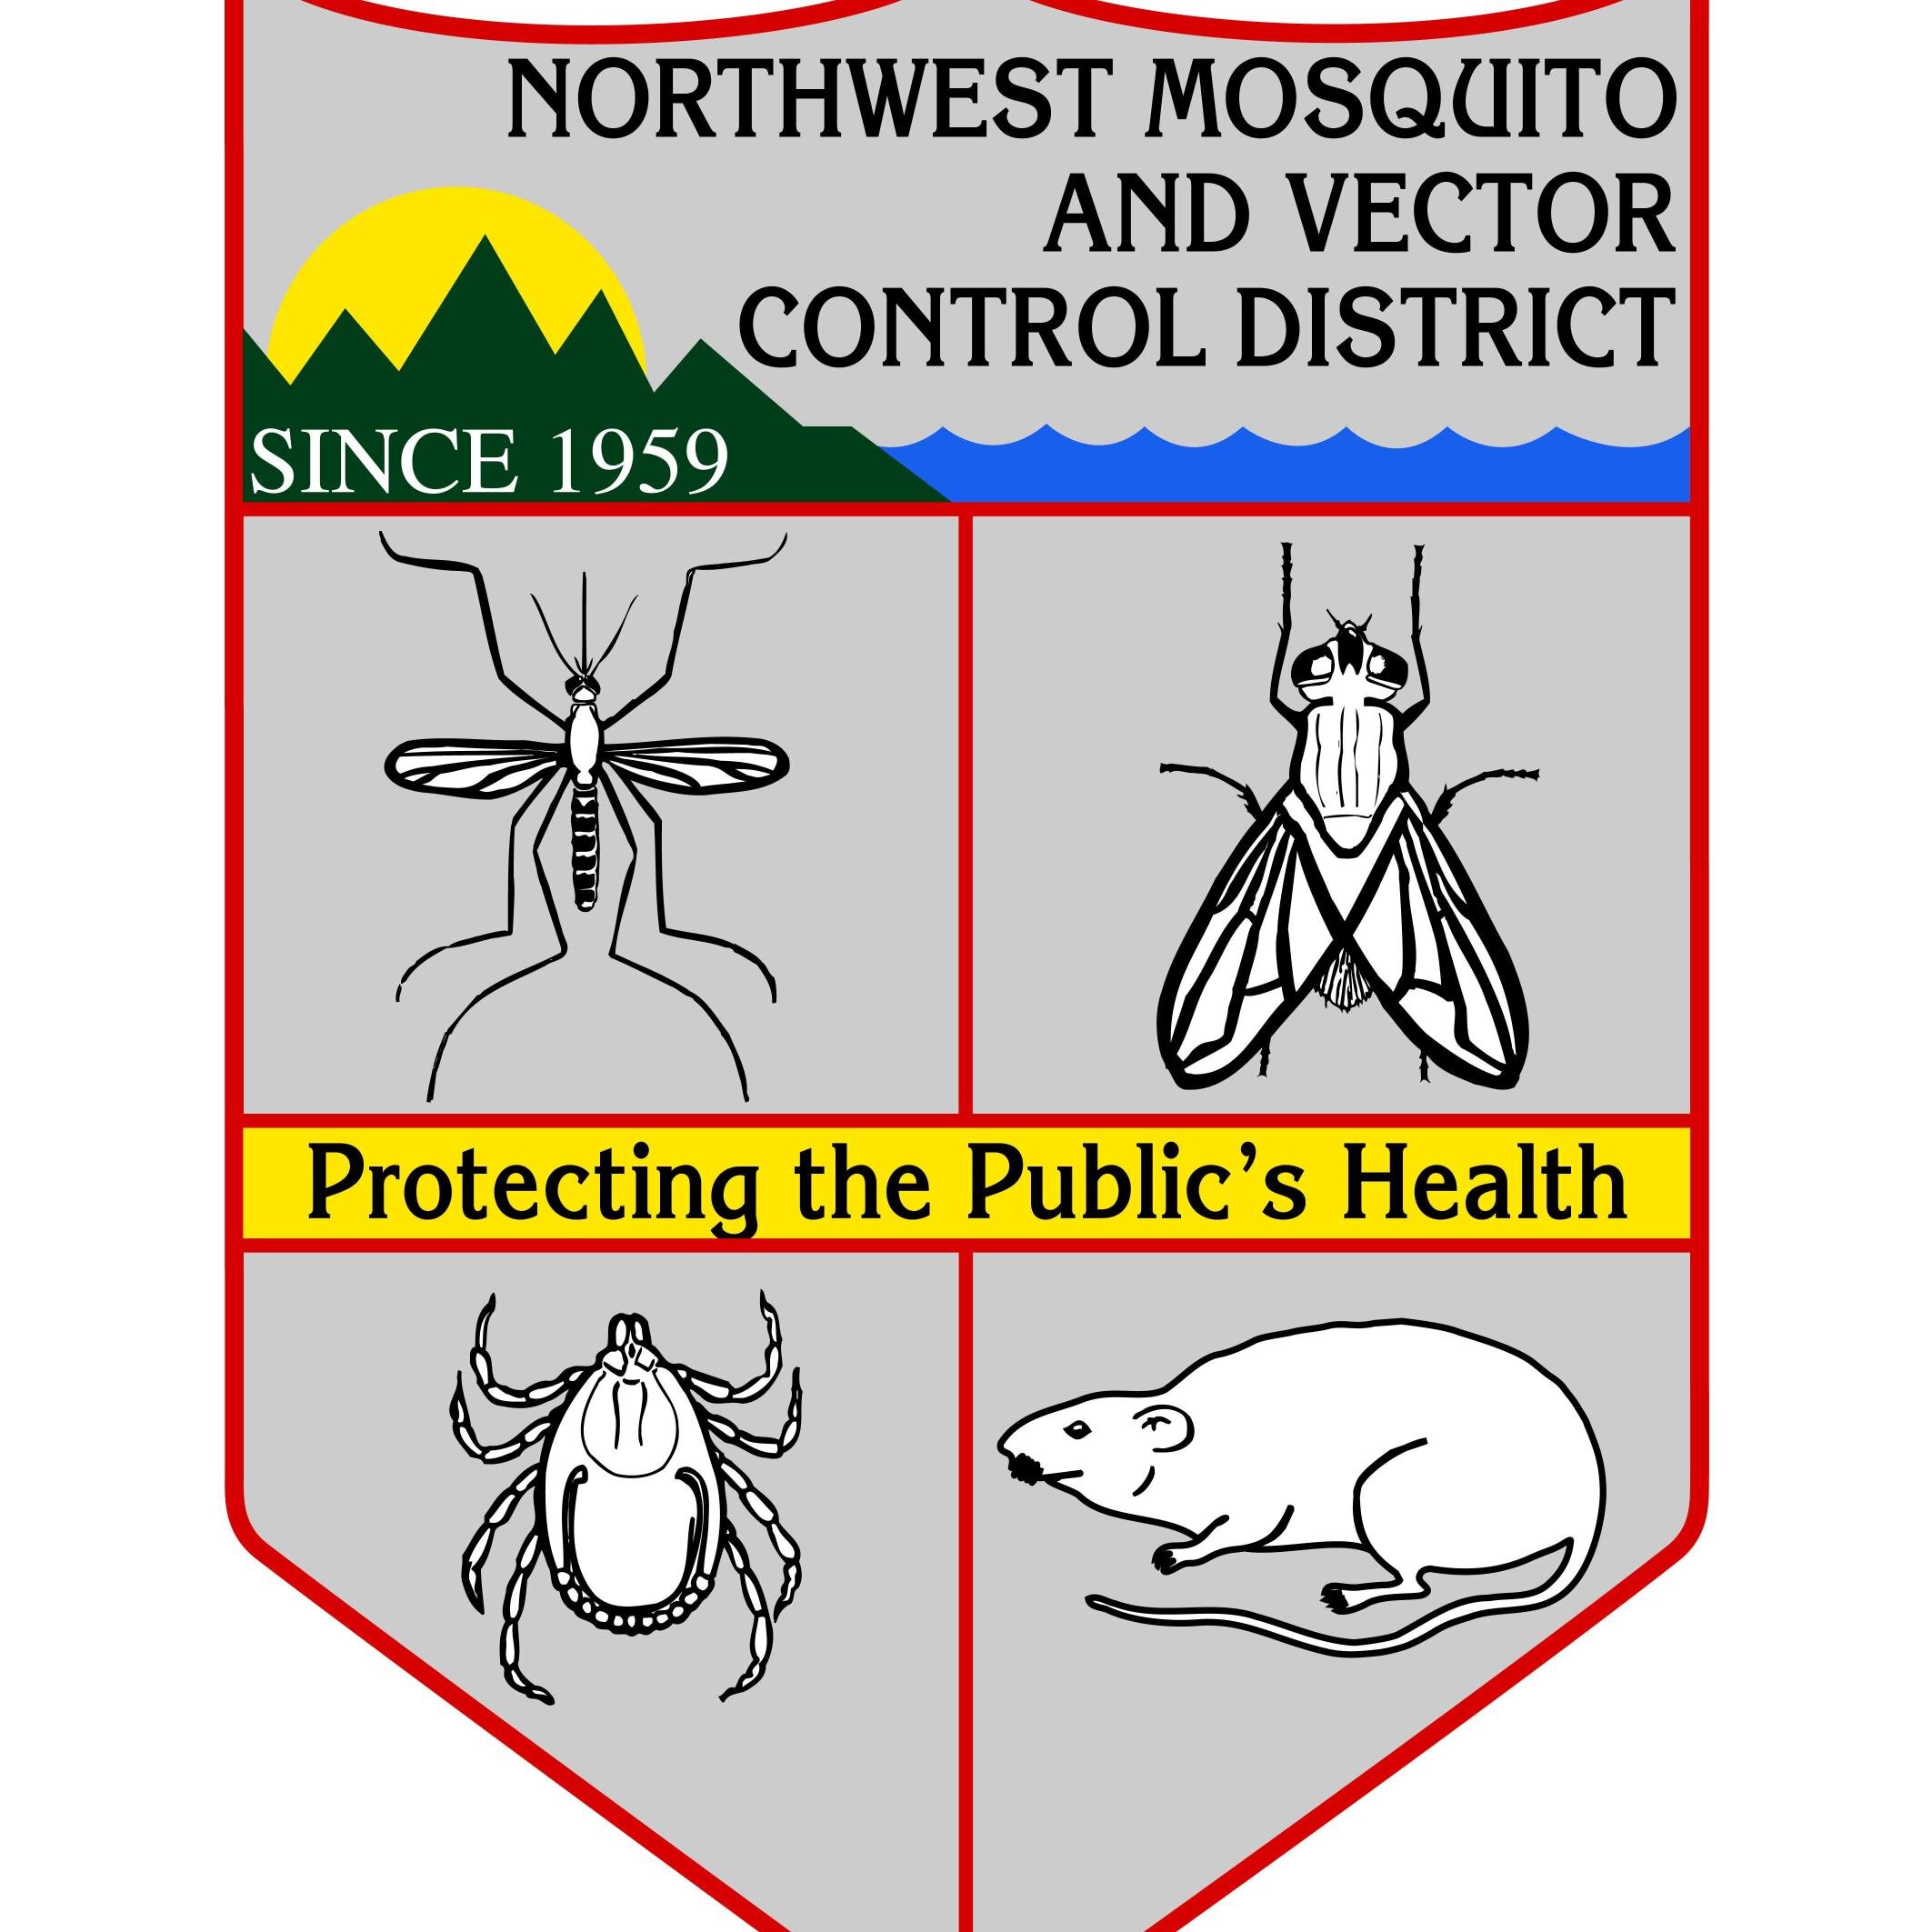 Since 1959, the Northwest Mosquito and Vector Control District provides mosquito and vector control services in the Northwest portion of Riverside County.